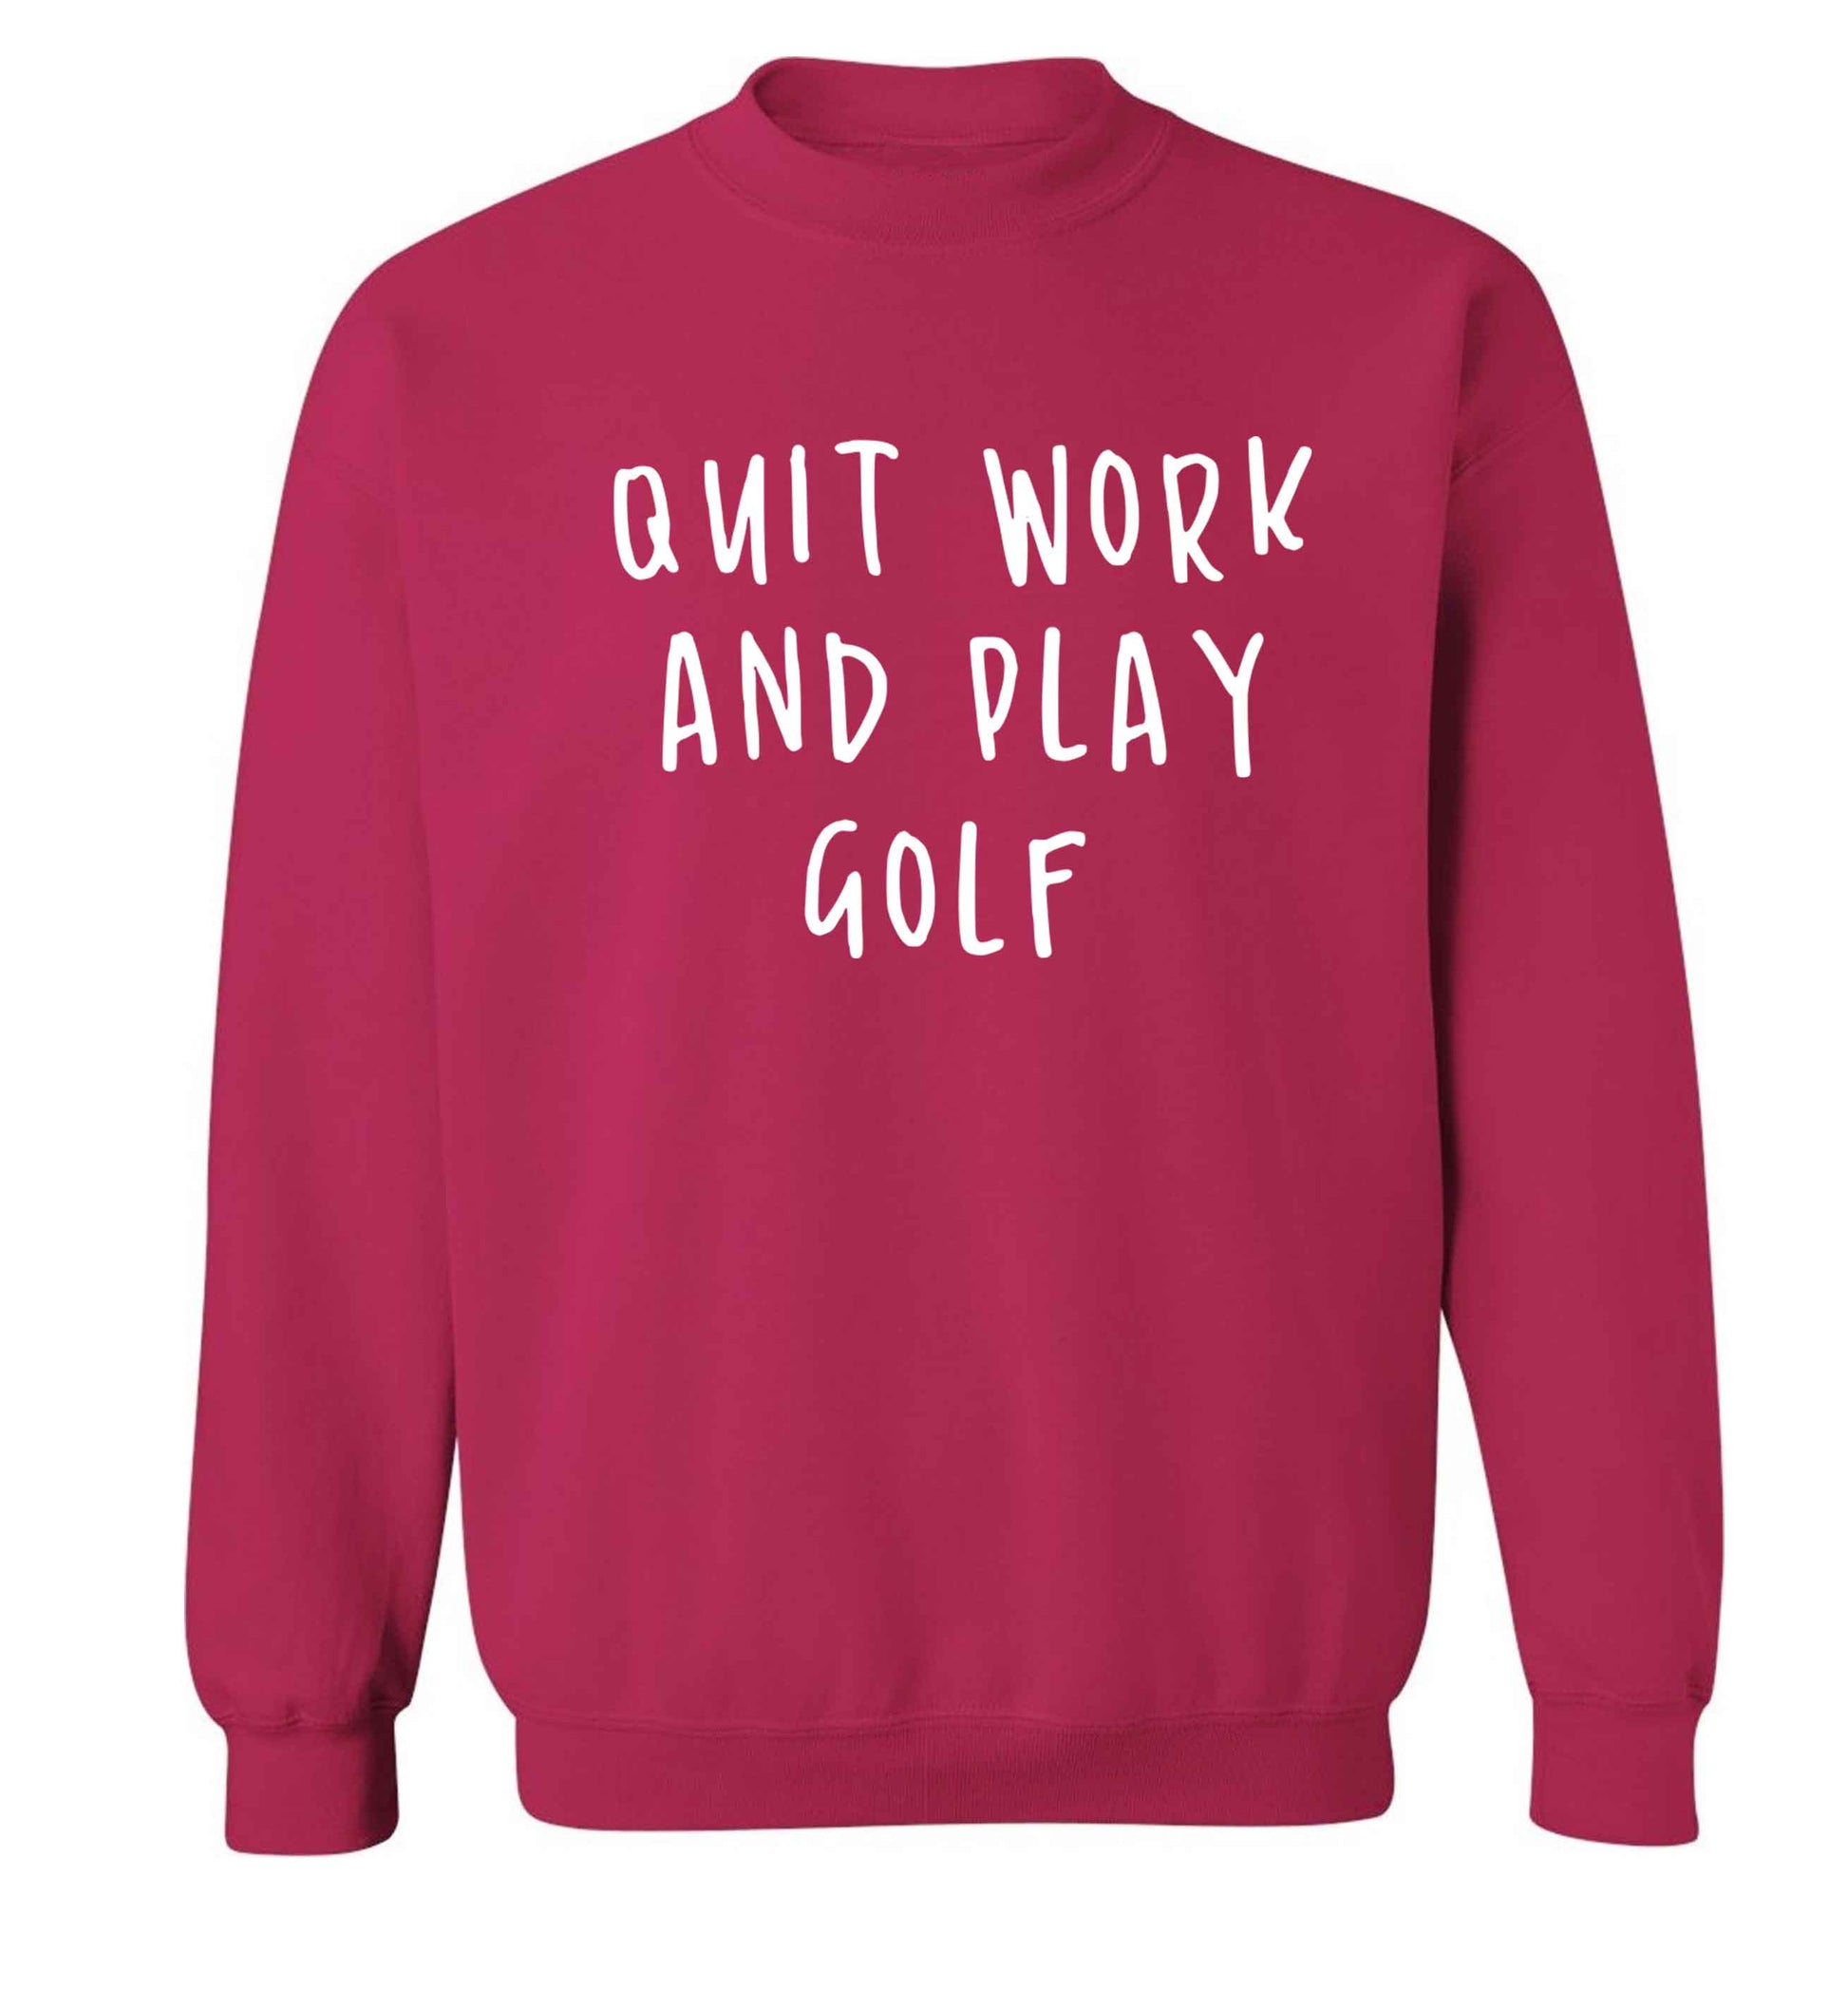 Quit work and play golf Adult's unisex pink Sweater 2XL